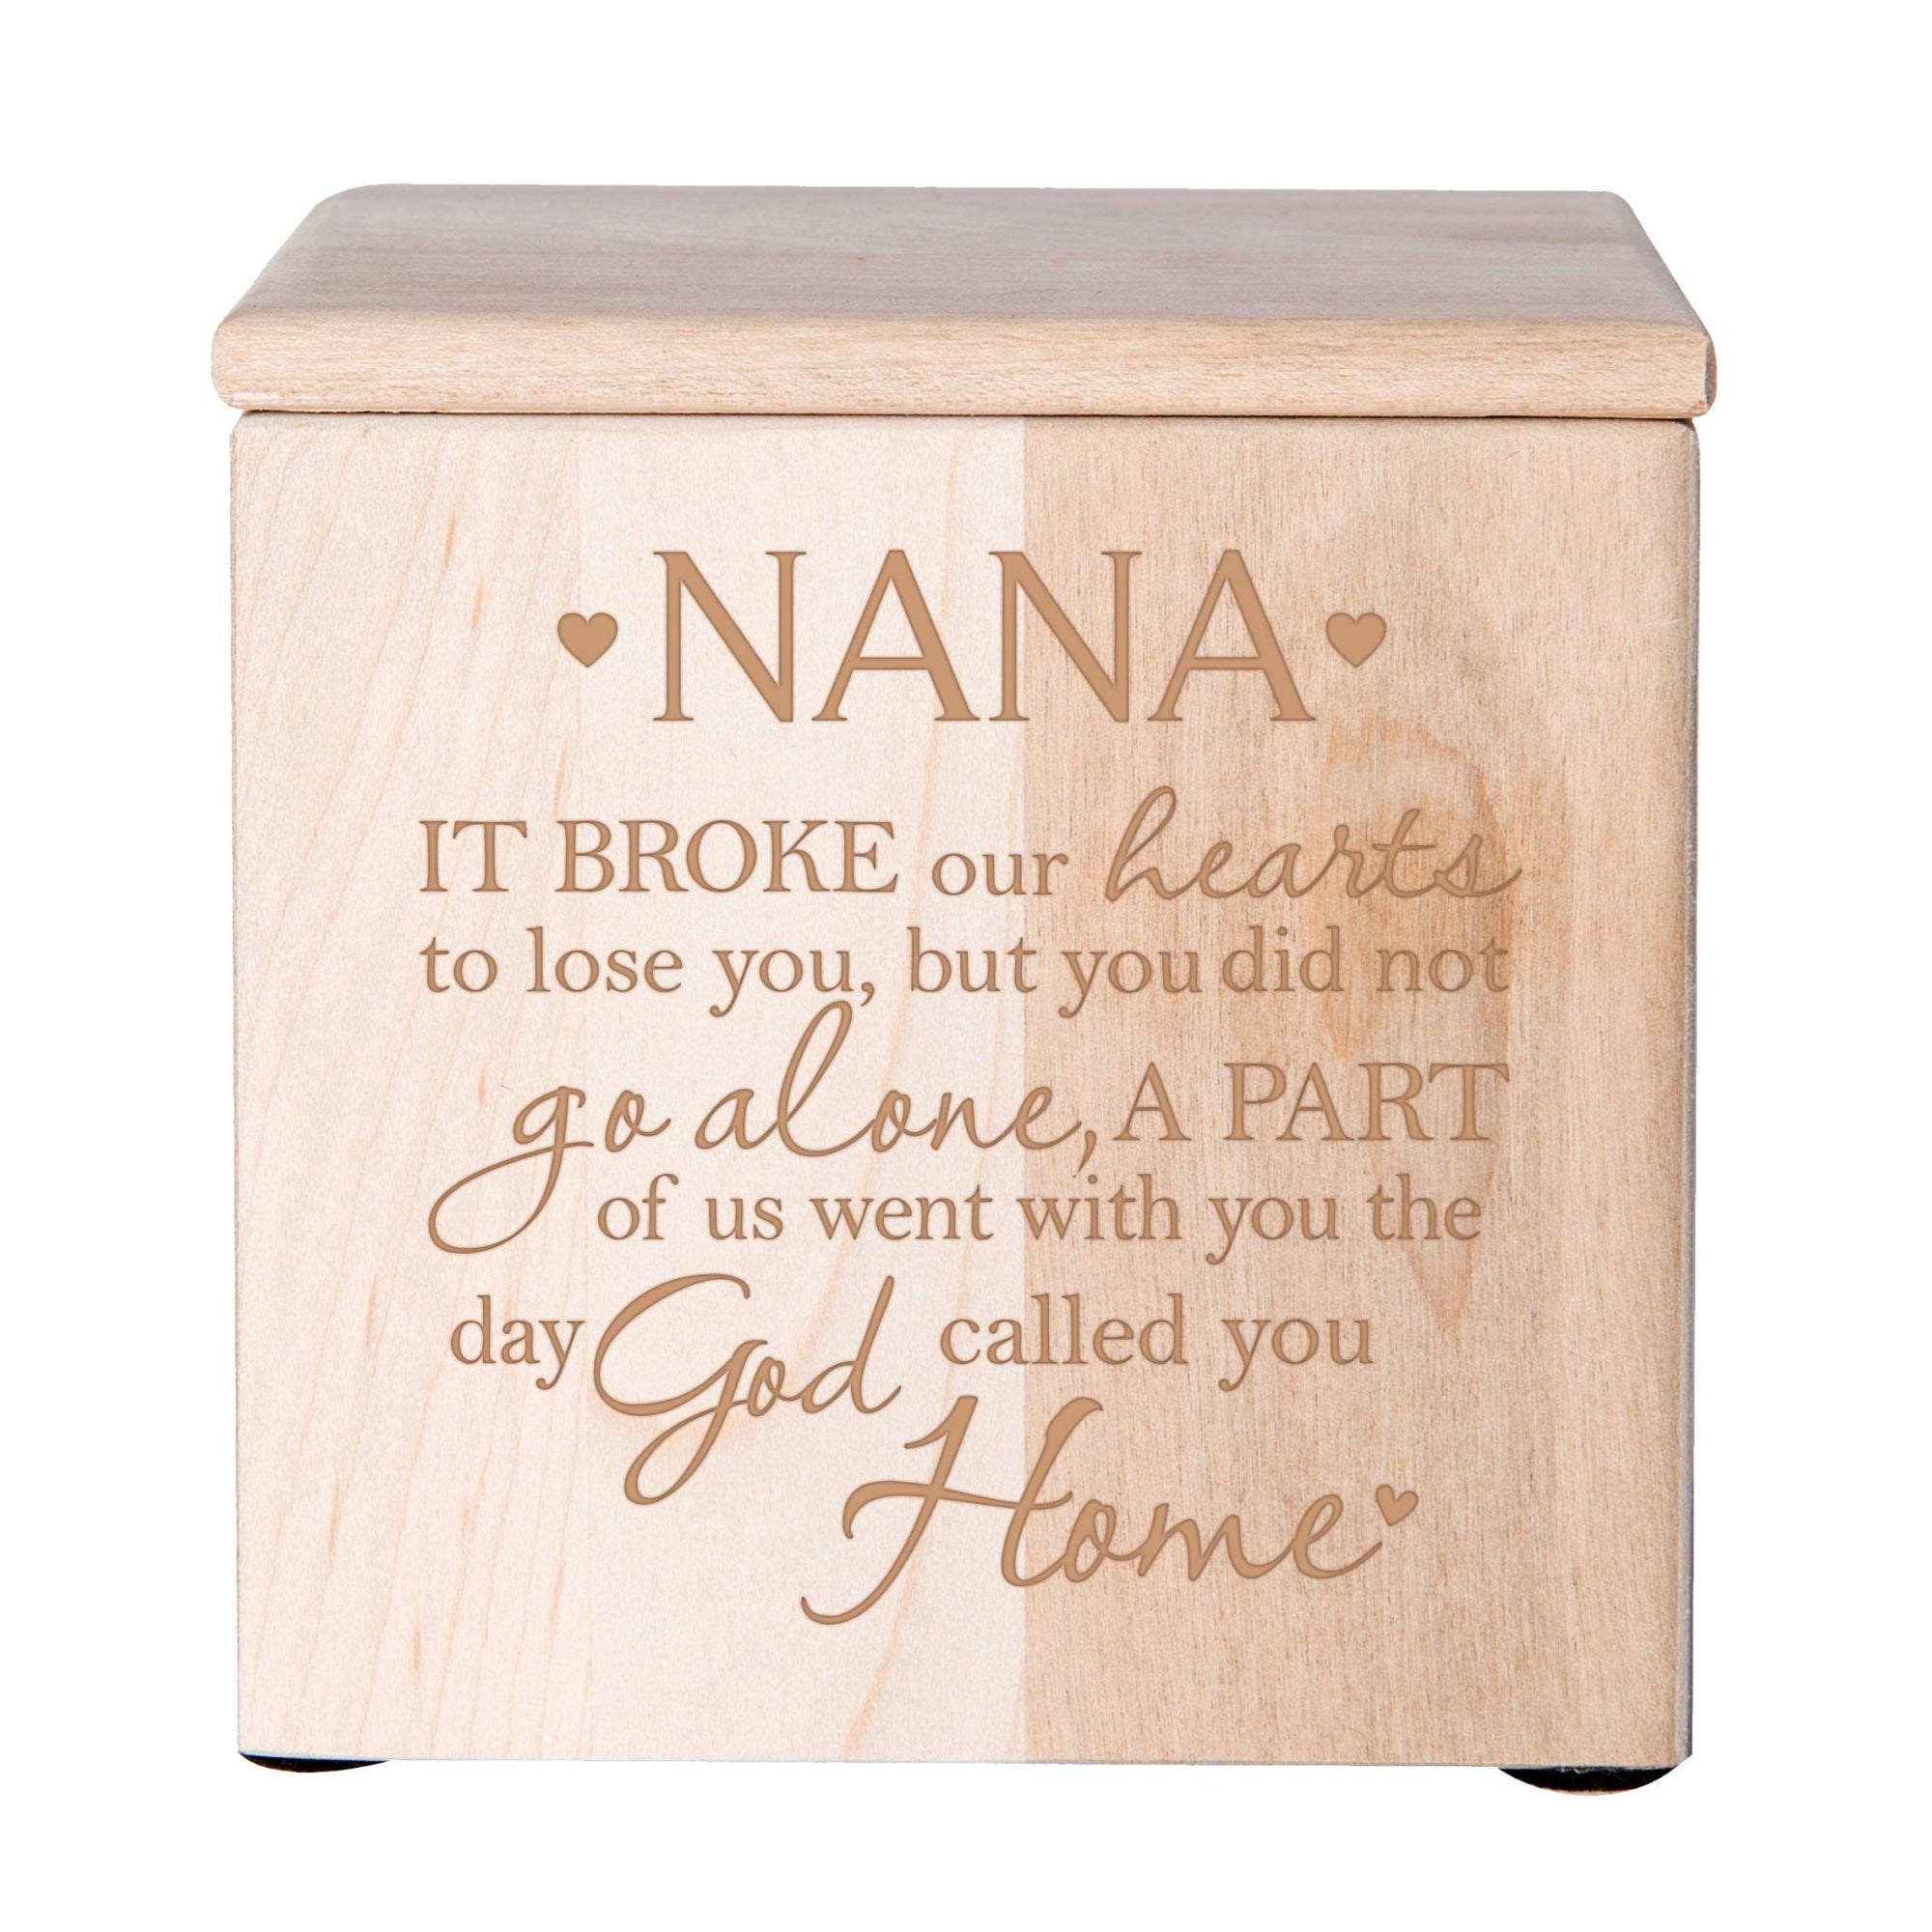 Modern Inspirational Memorial Wooden Cremation Urn Box 4.5x4.5in Holds 49 Cu Inches Of Human Ashes (It Broke Our Hearts Nana) Funeral and Commemorative Keepsake - LifeSong Milestones